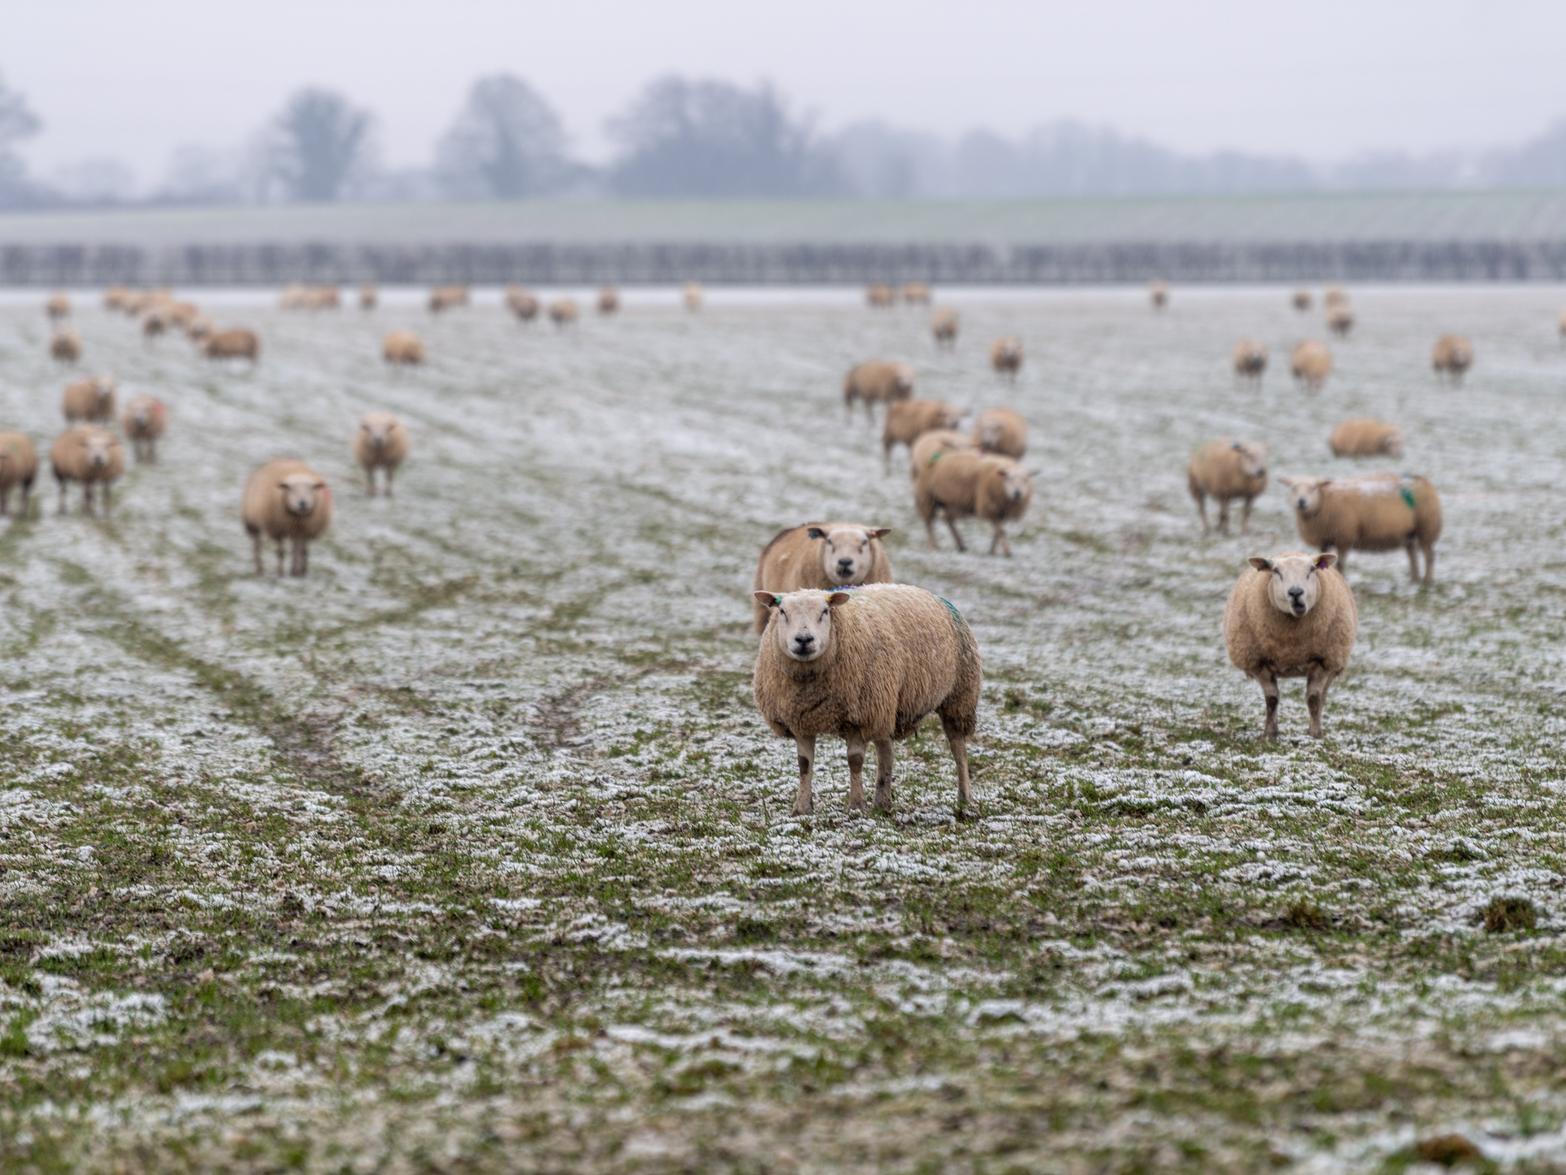 Sheep in a snowy field near Tadcaster